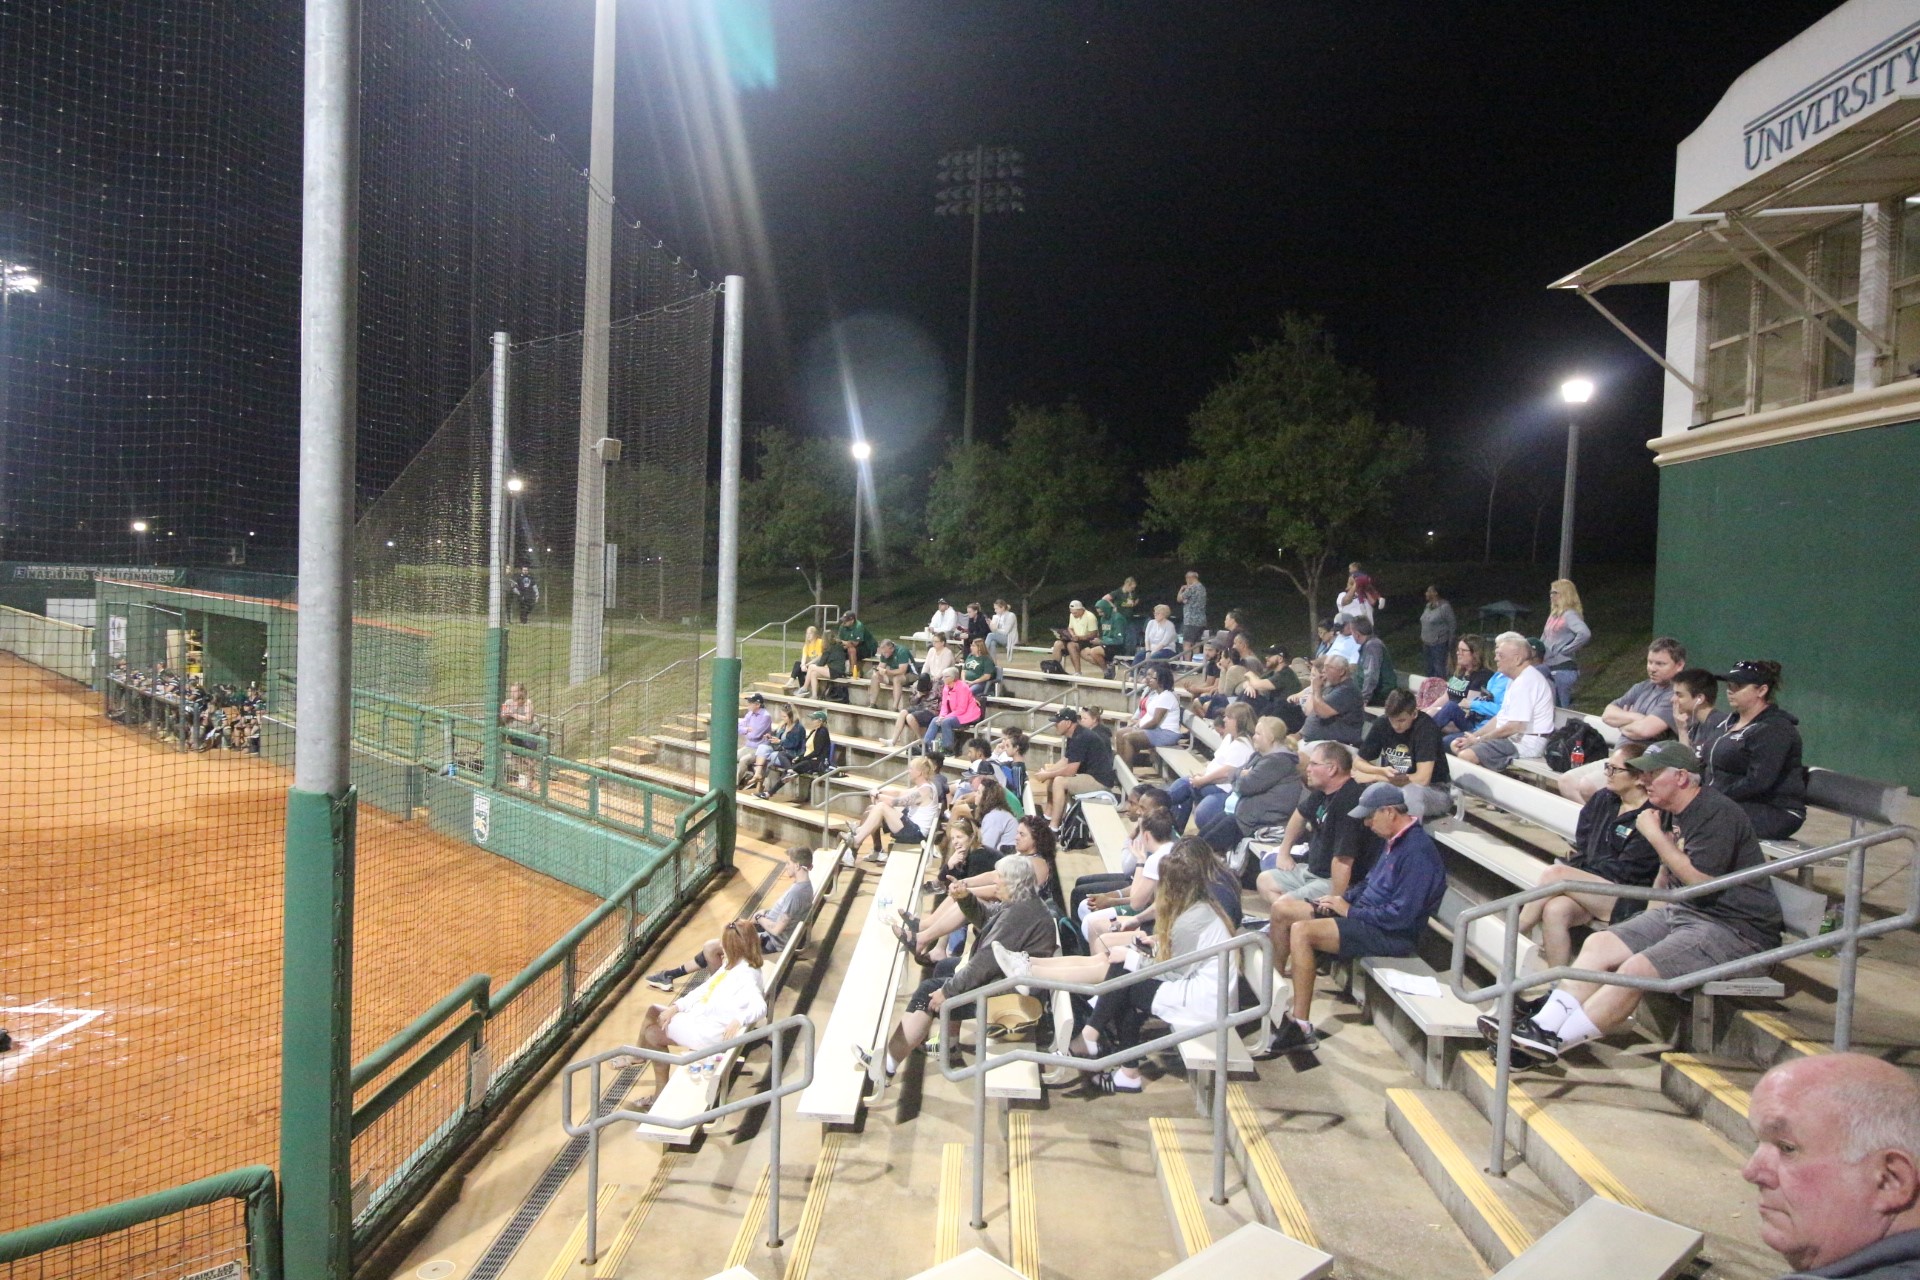 The Softball Fans’ loyalty speaks volumes, as they spent nearly four4 hours cheering nonstop. 